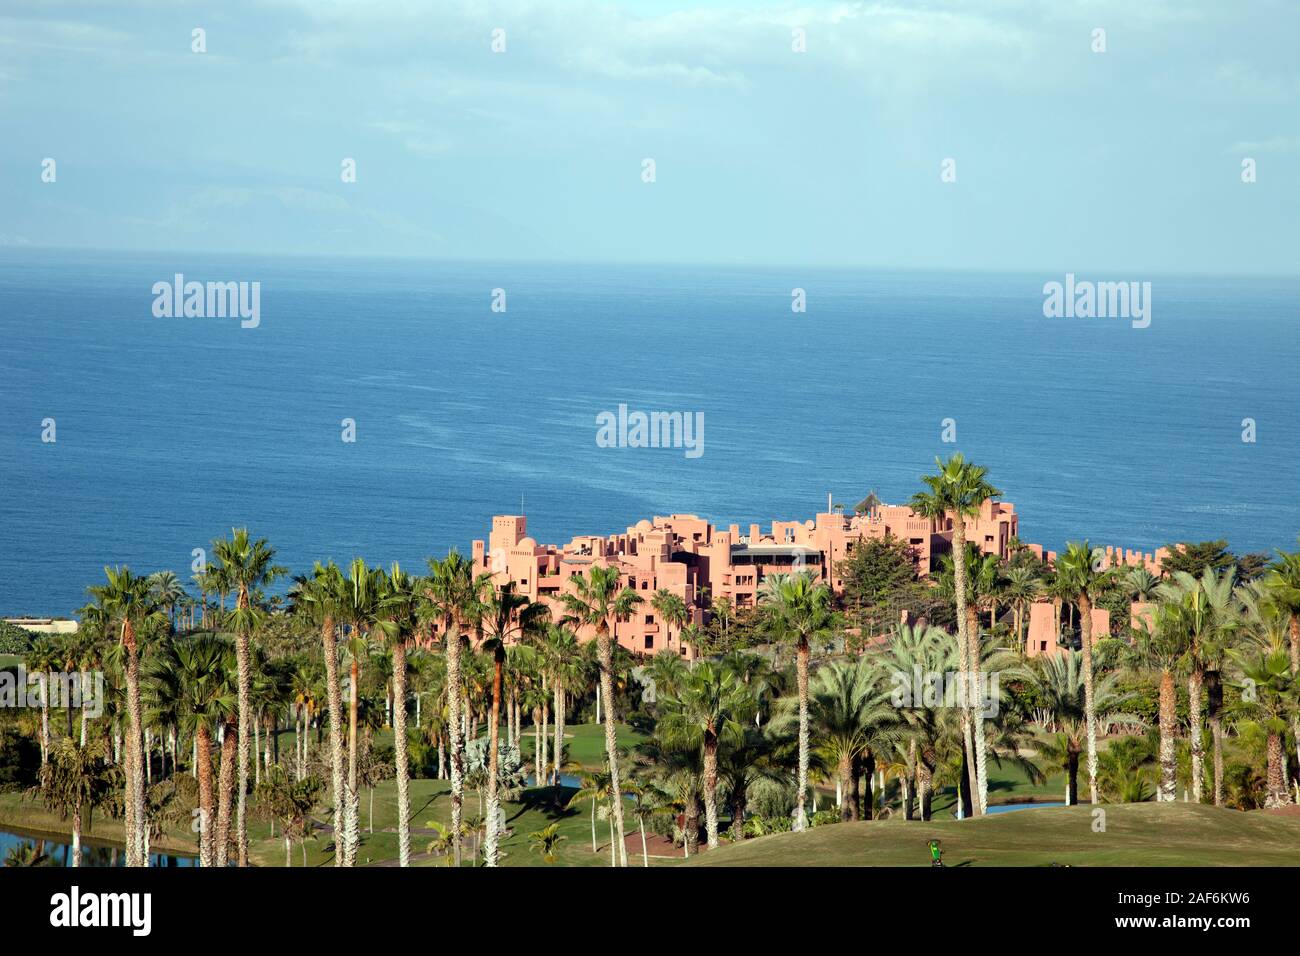 Ritz-Carlton Hotel, 5 star hotel, Tenerife, Îles Canaries Banque D'Images